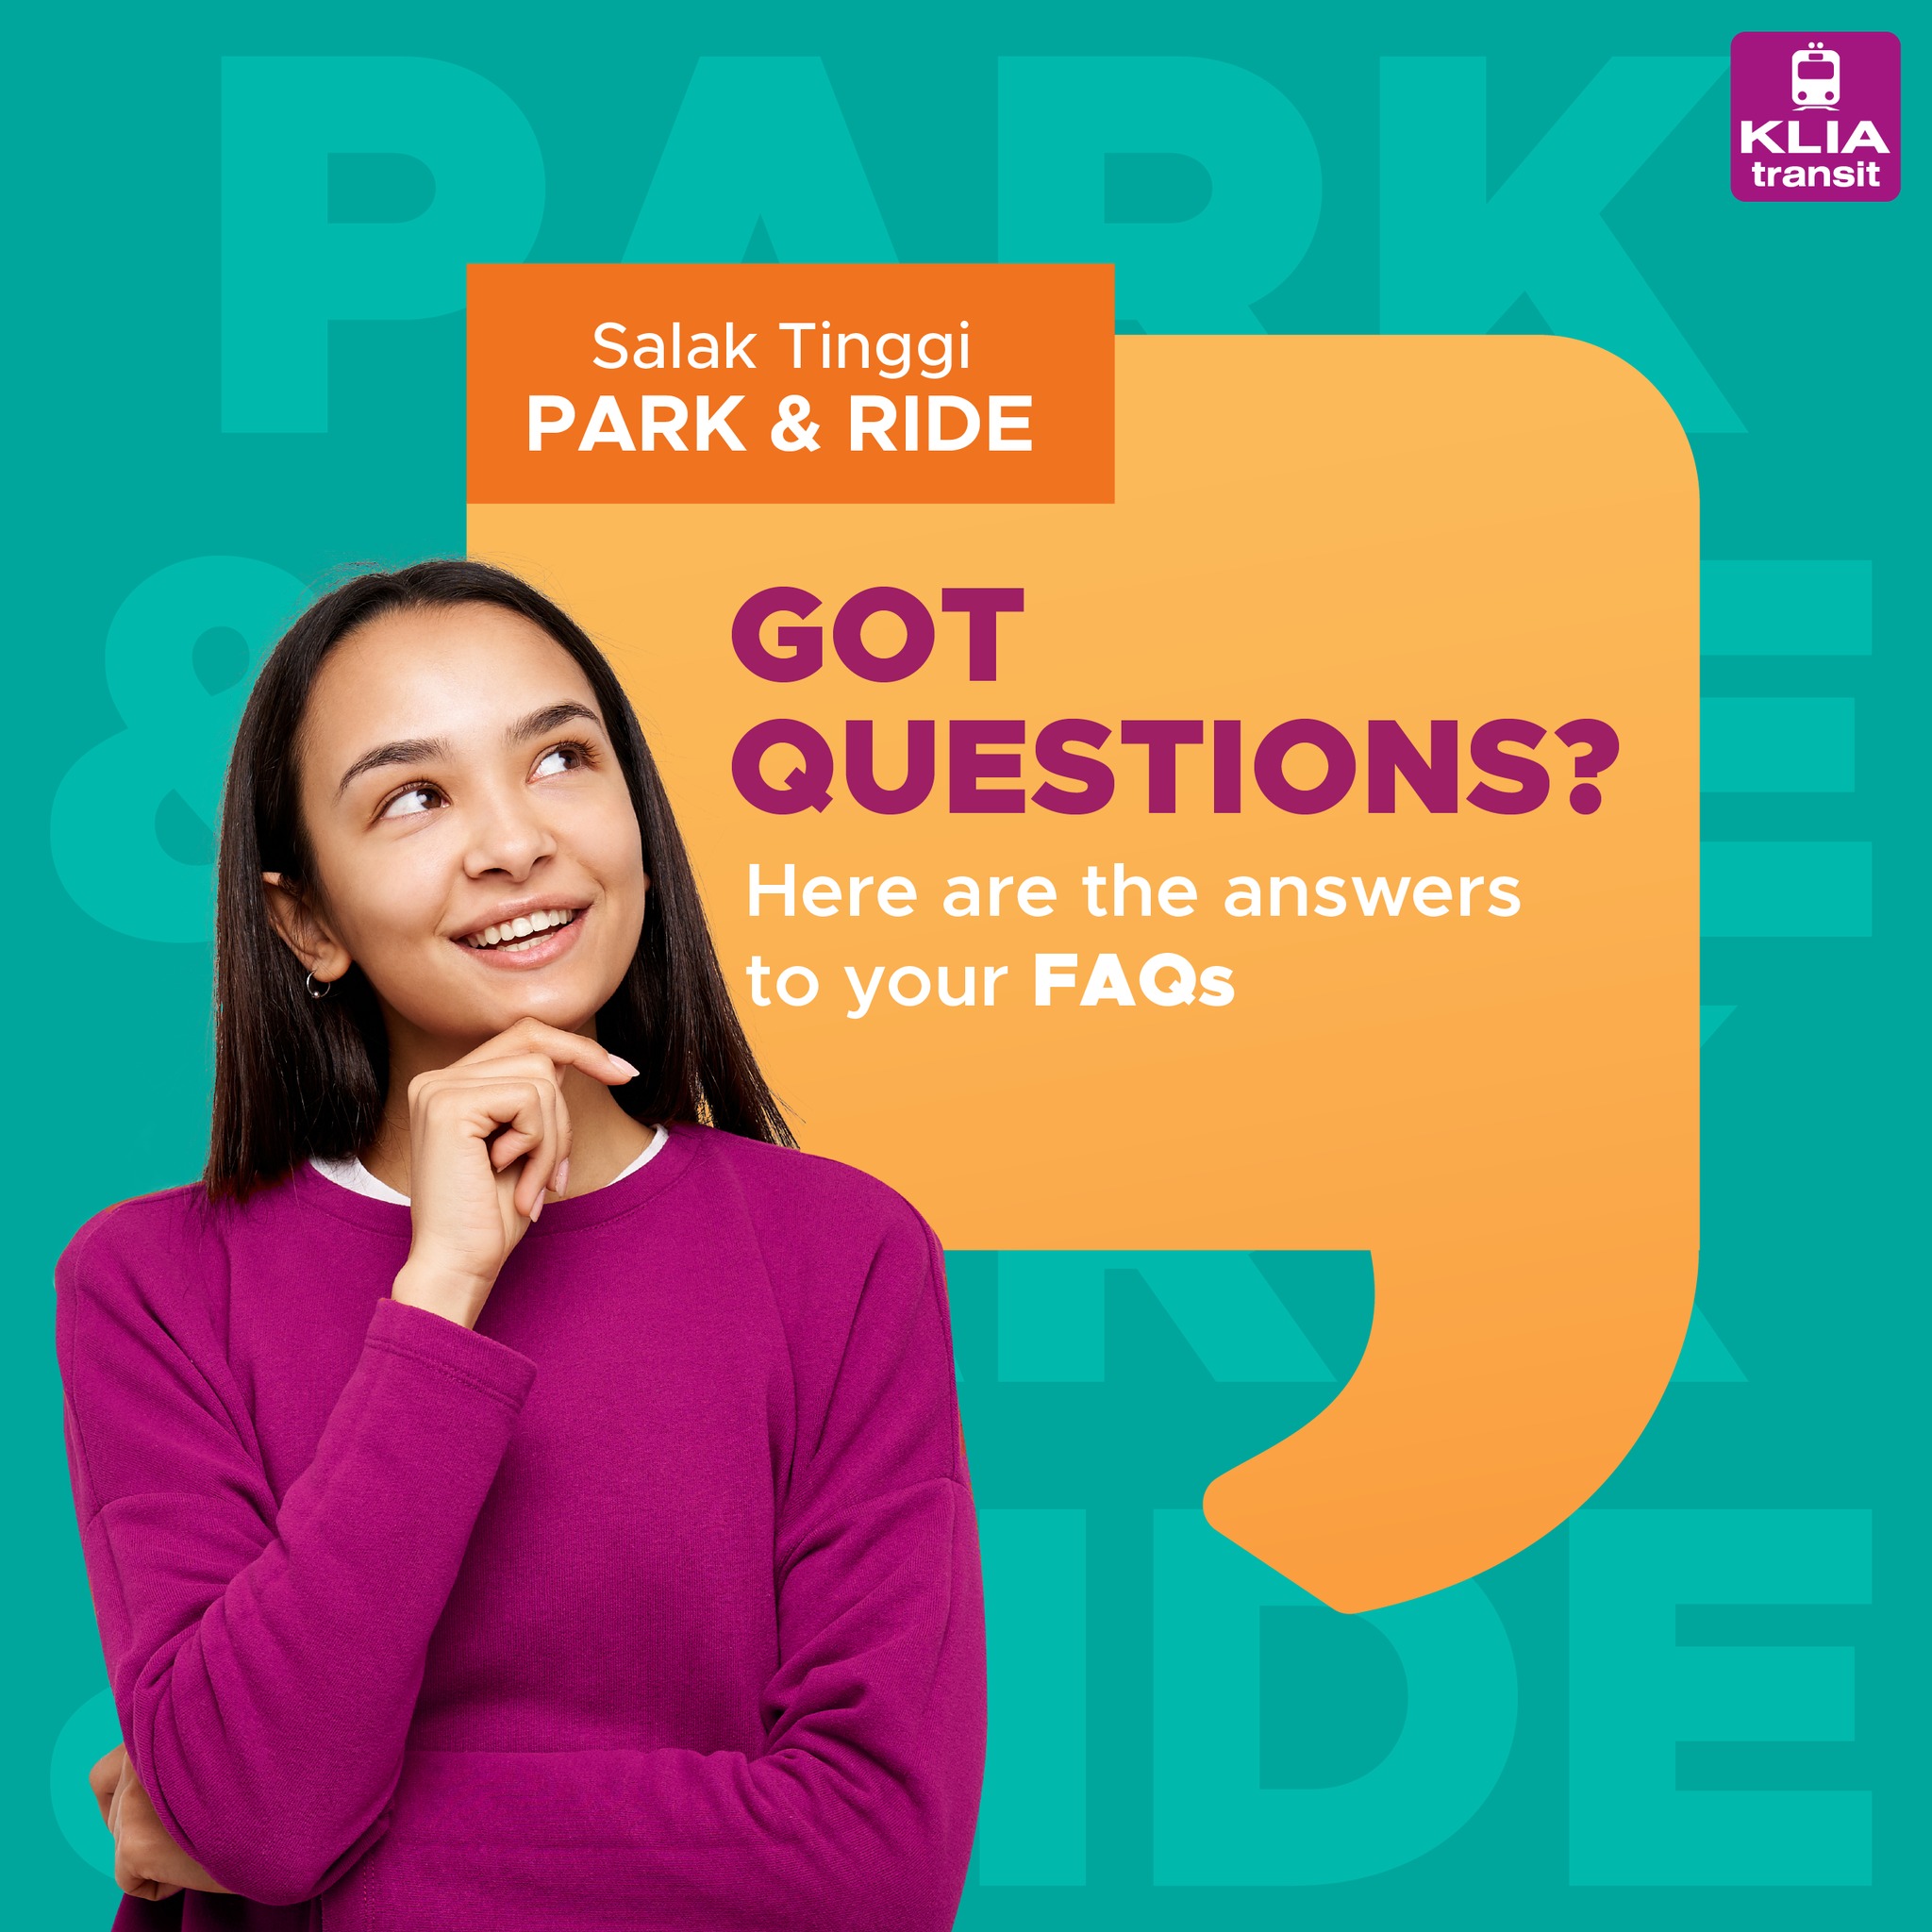 New rates for Salak Tinggi Park & Ride from July 1 - daytime RM3 ...